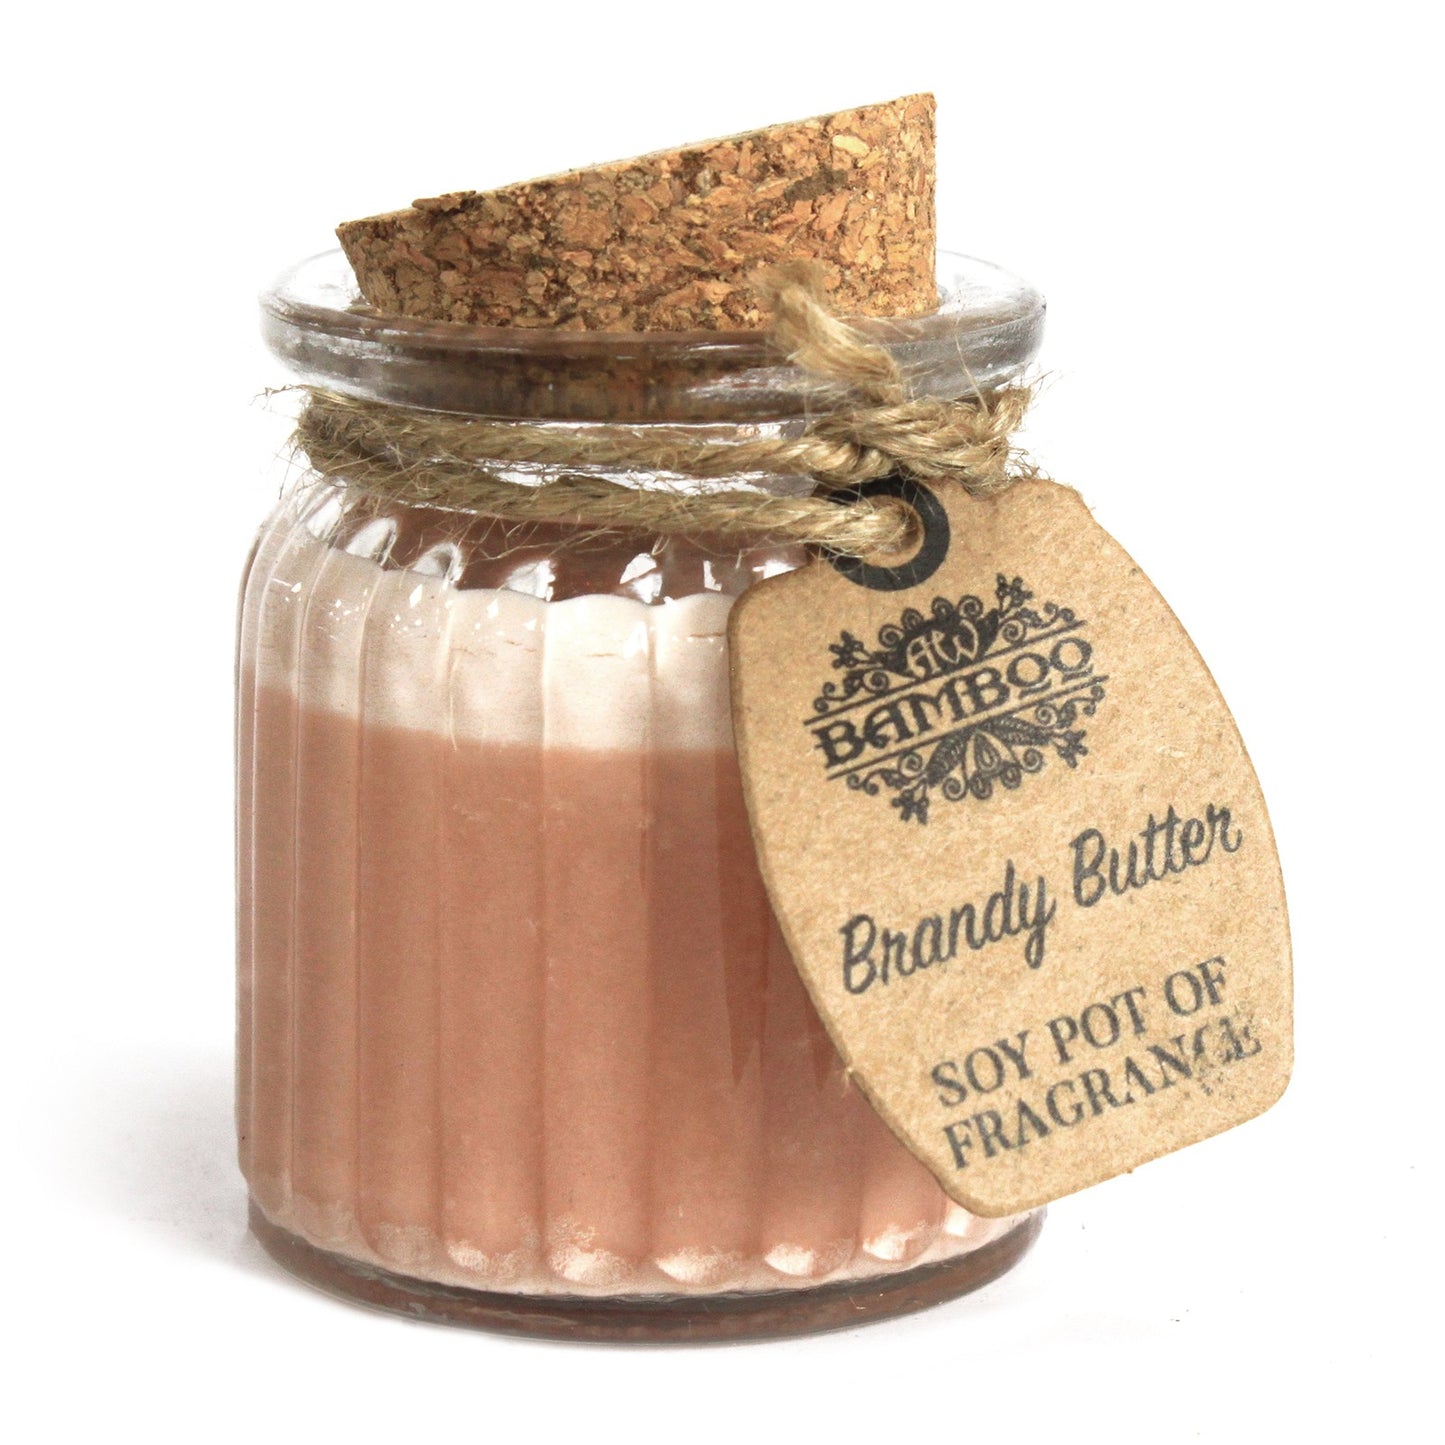 Brandy Butter Soy Pot of Fragrance Candles ( Pack of Two )